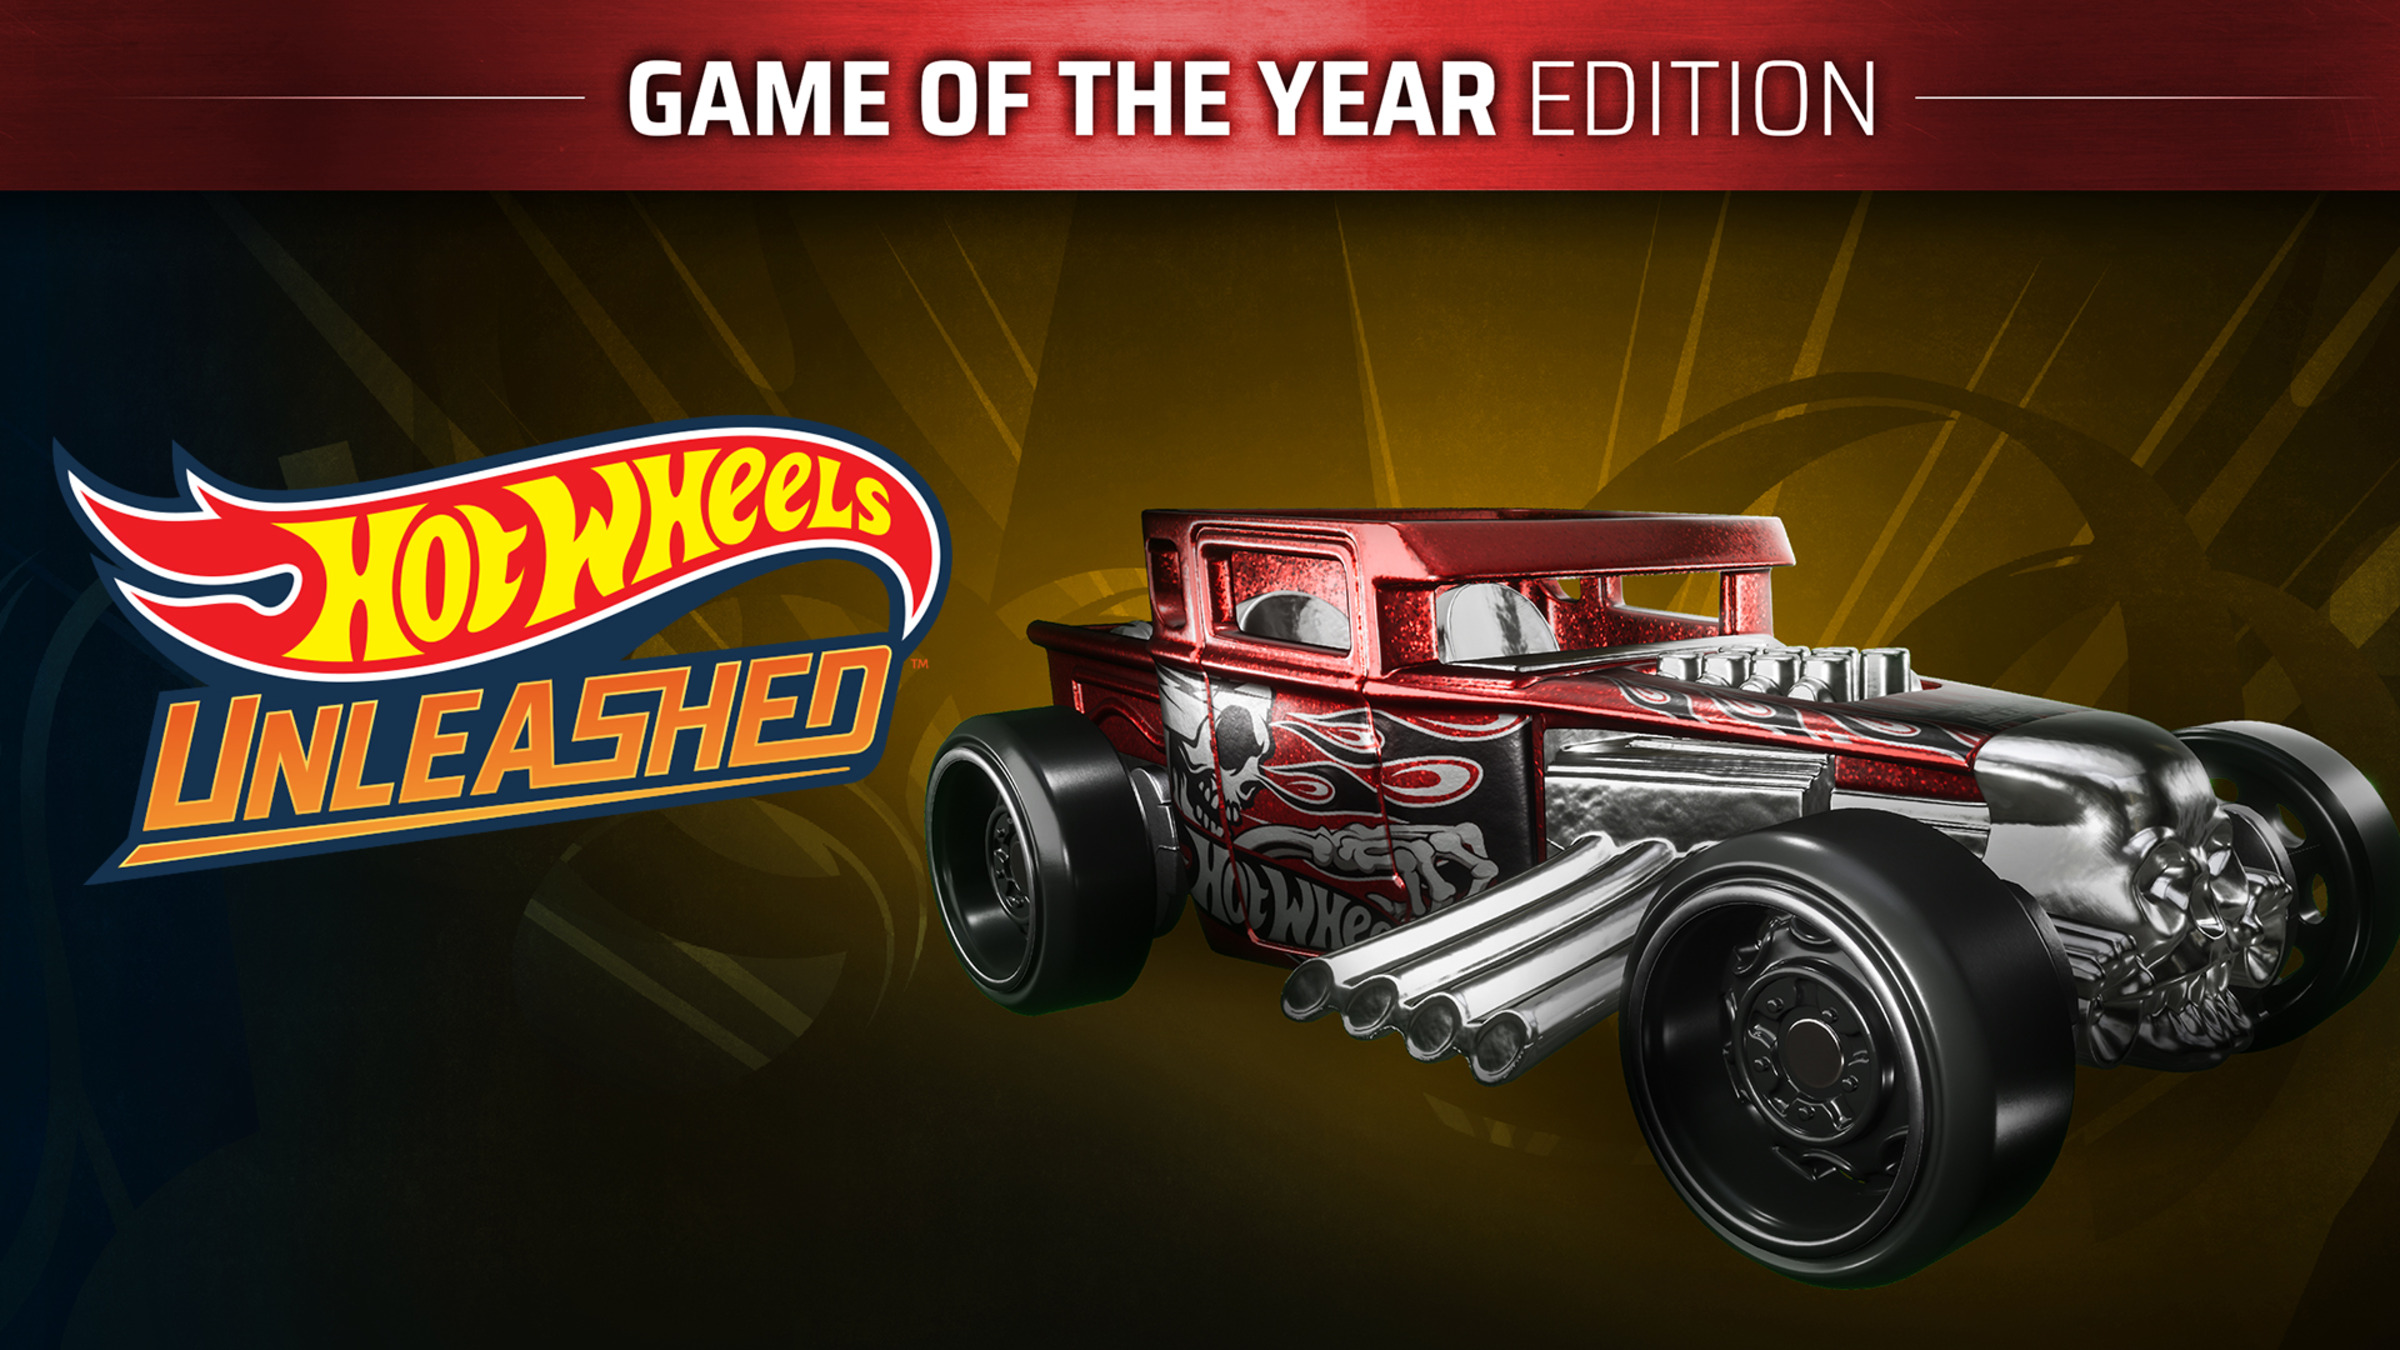 HOT WHEELS UNLEASHED™ - Game of the Year Edition Nintendo Switch $26.99